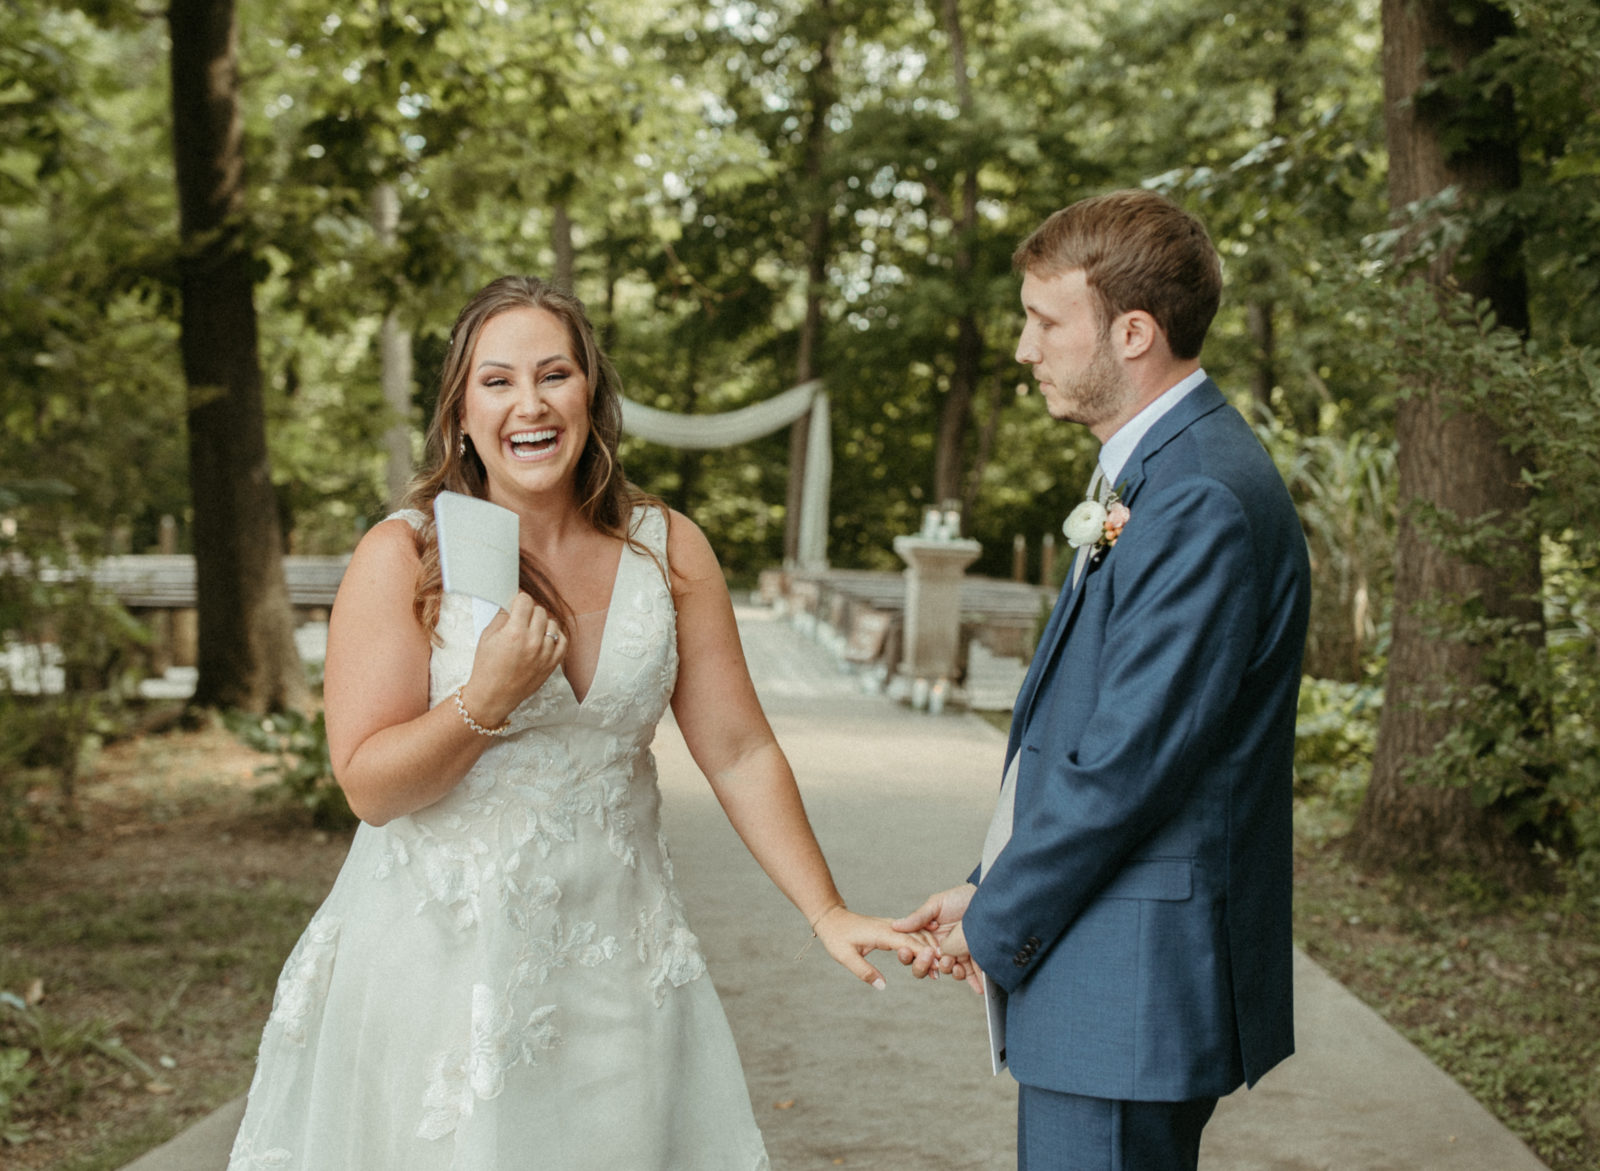 A Modern Fairytale in Ohio - The Wedding Collective